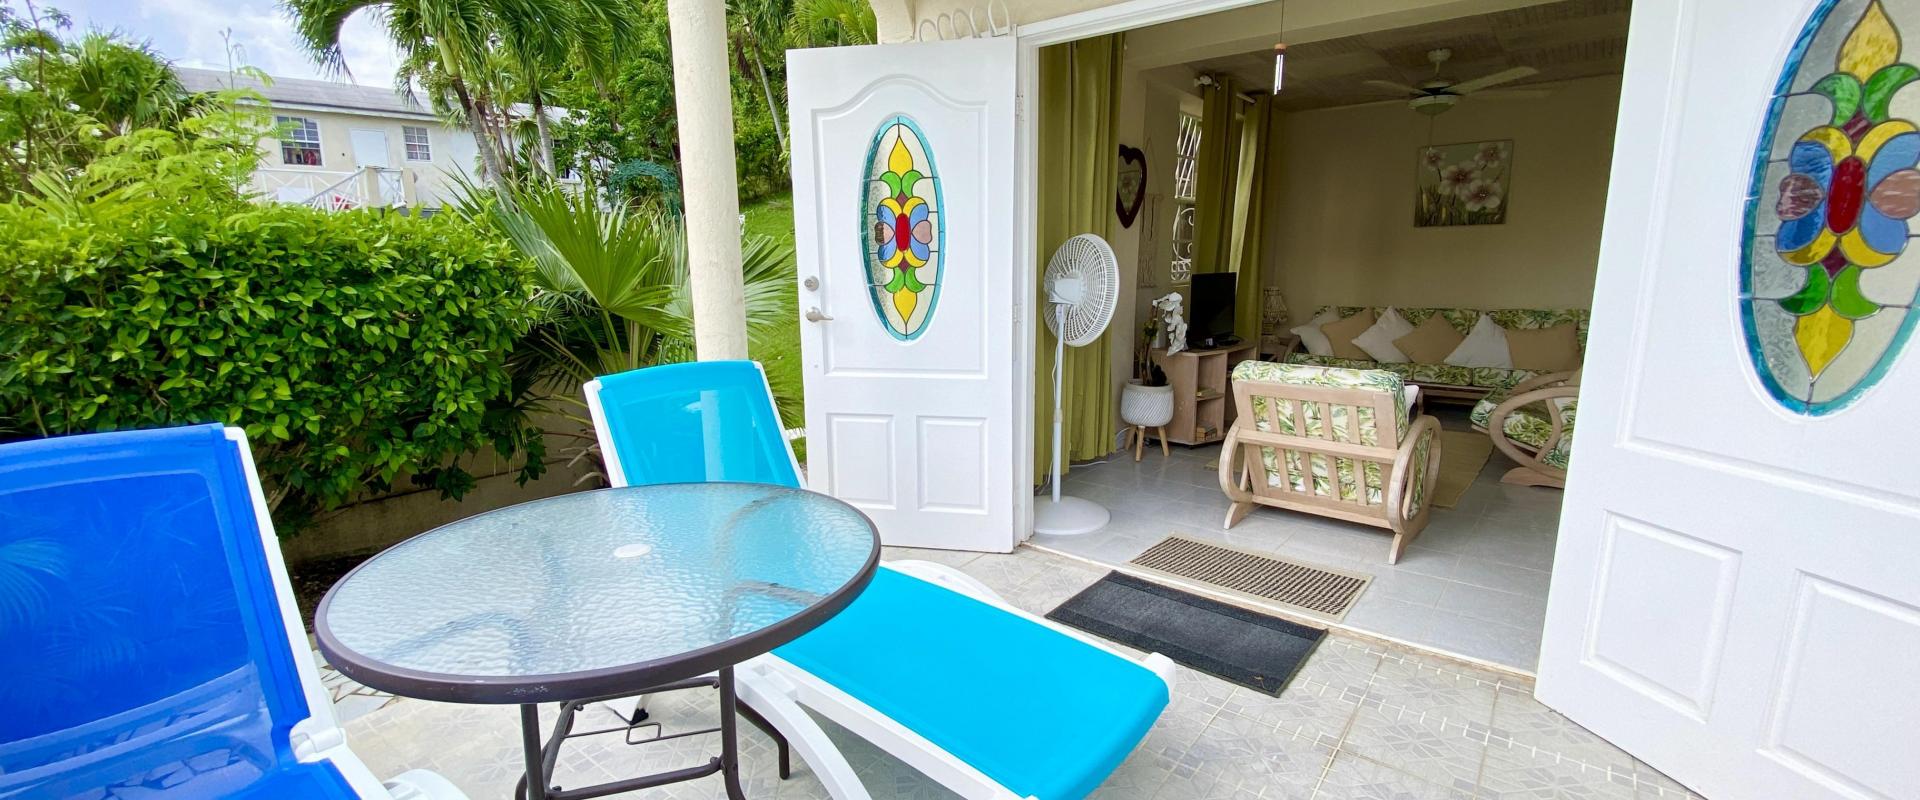 Heywoods 145 Barbados Vacation Rental Apartment Outside Patio with Lounge Chairs